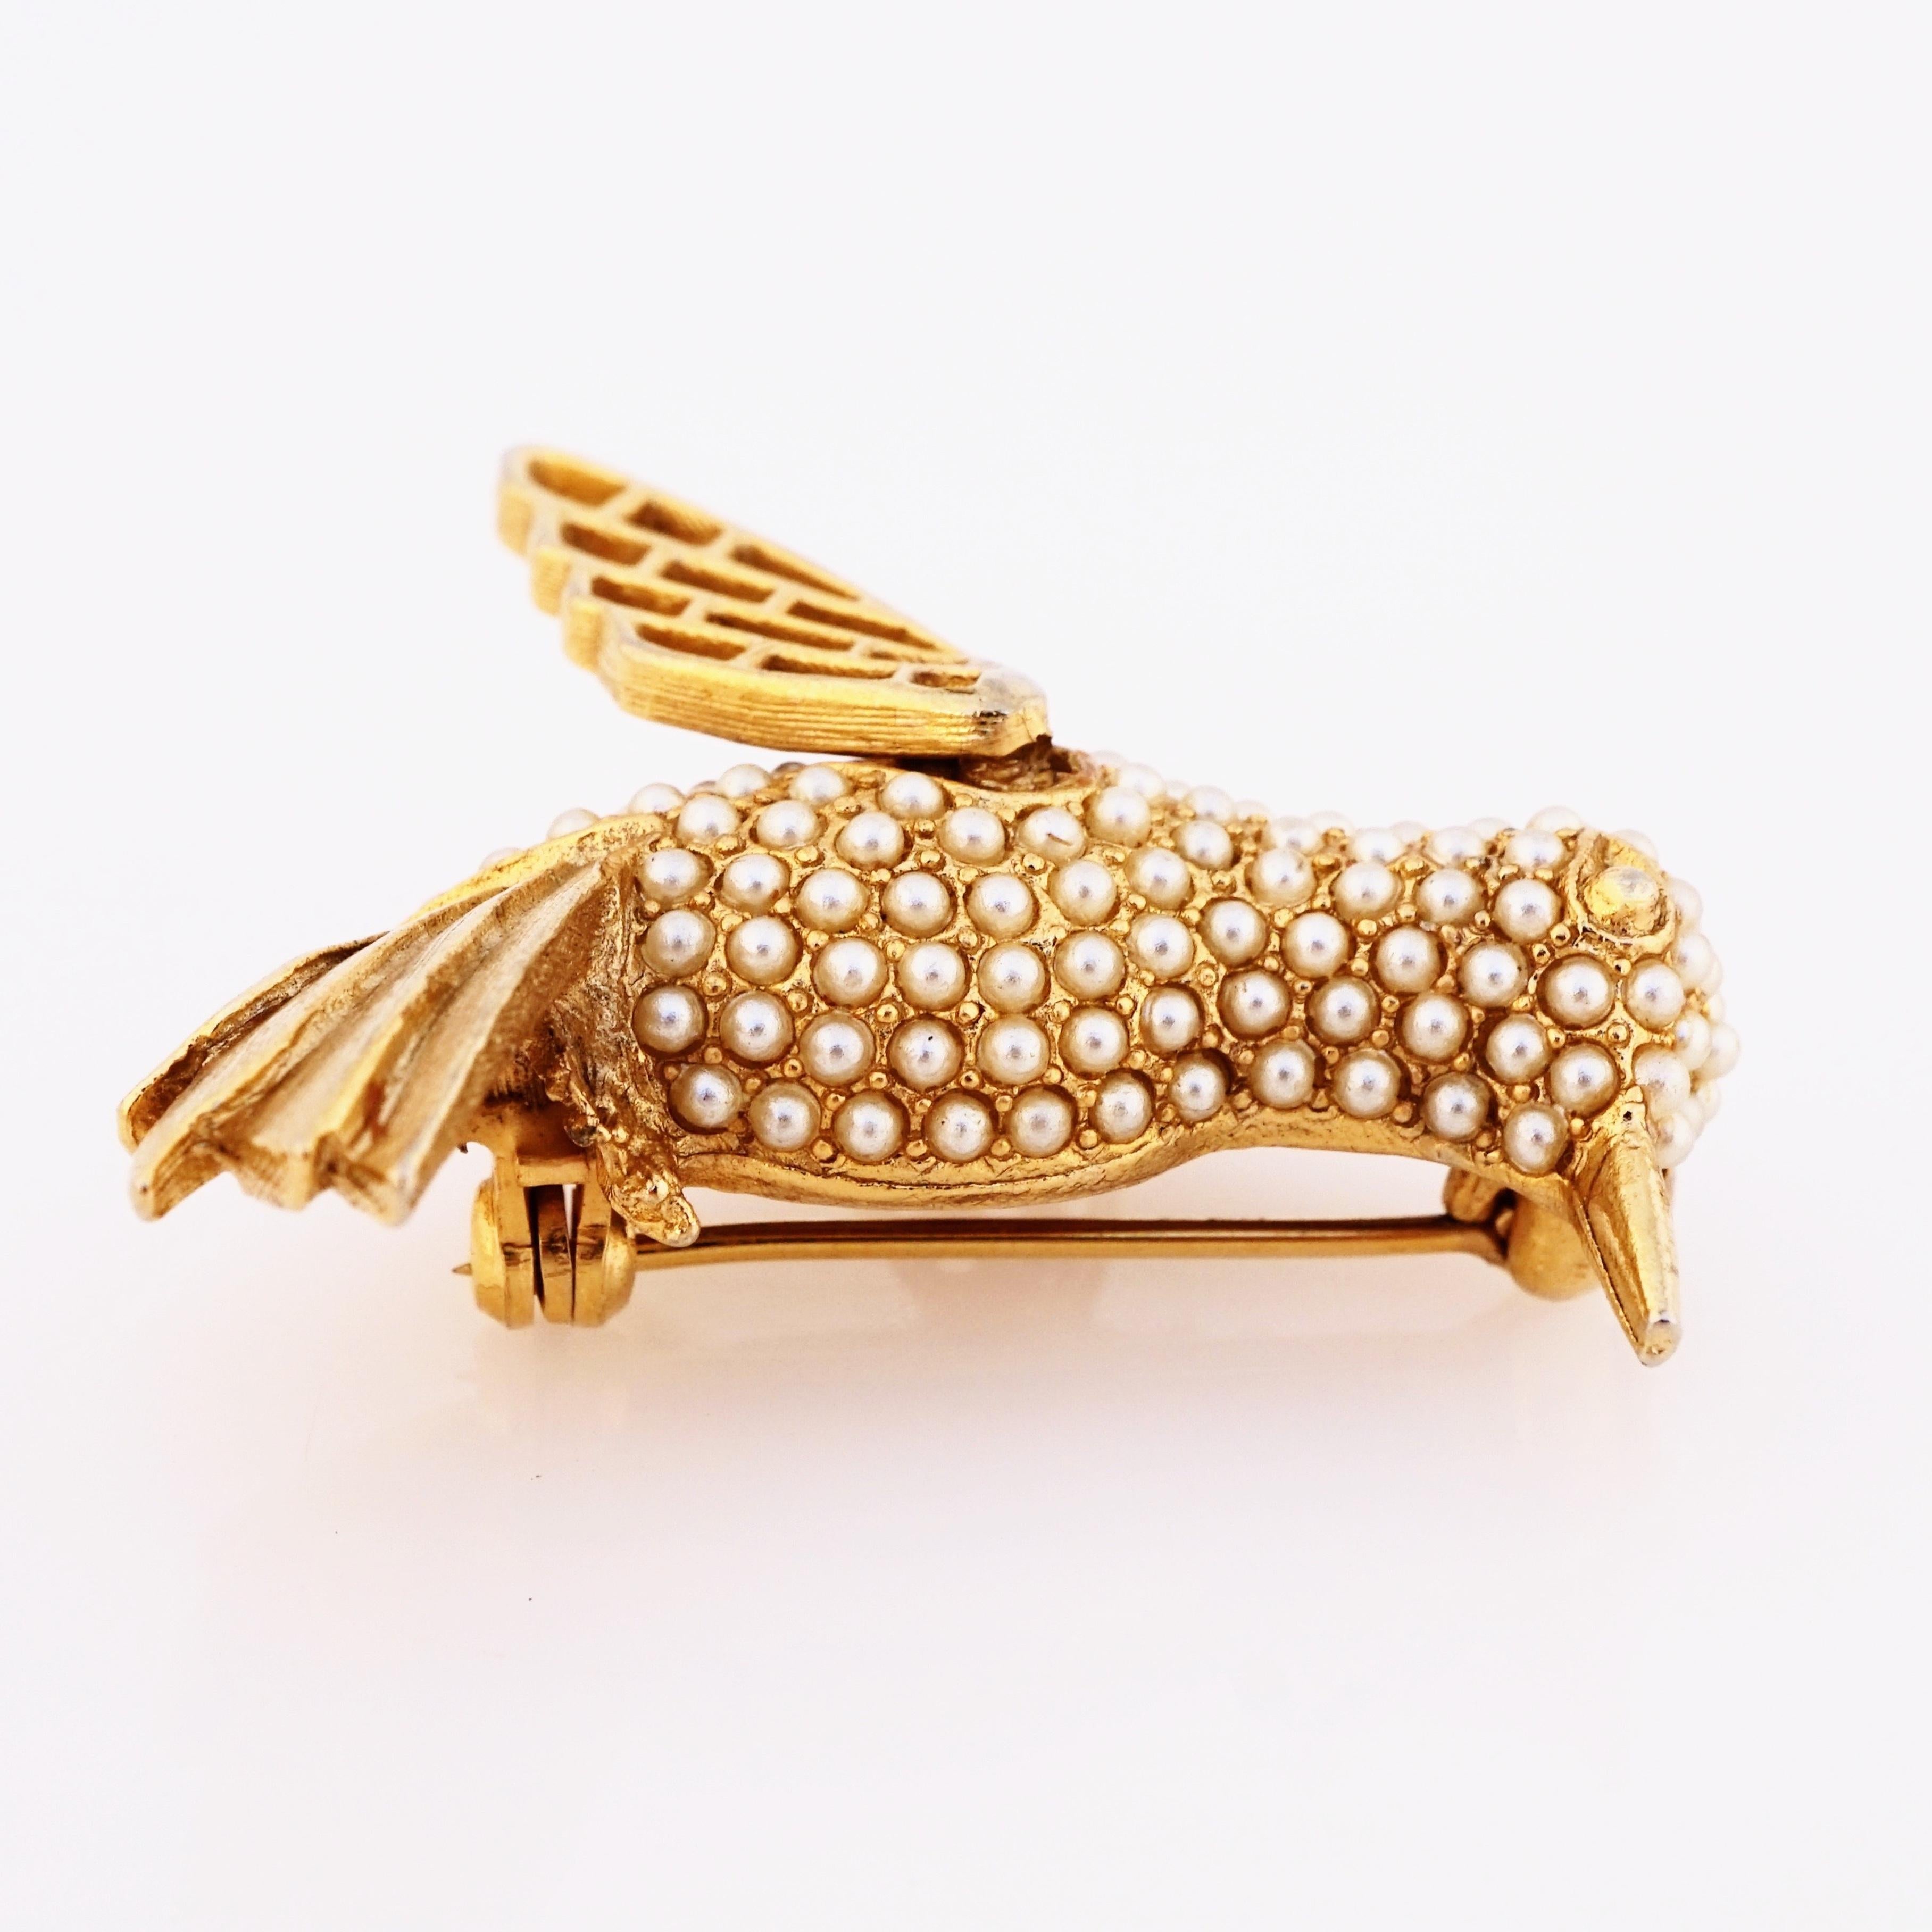 Modern Gold Flying Hummingbird Figural Brooch With Seed Pearl Pavé By Hargo, 1950s